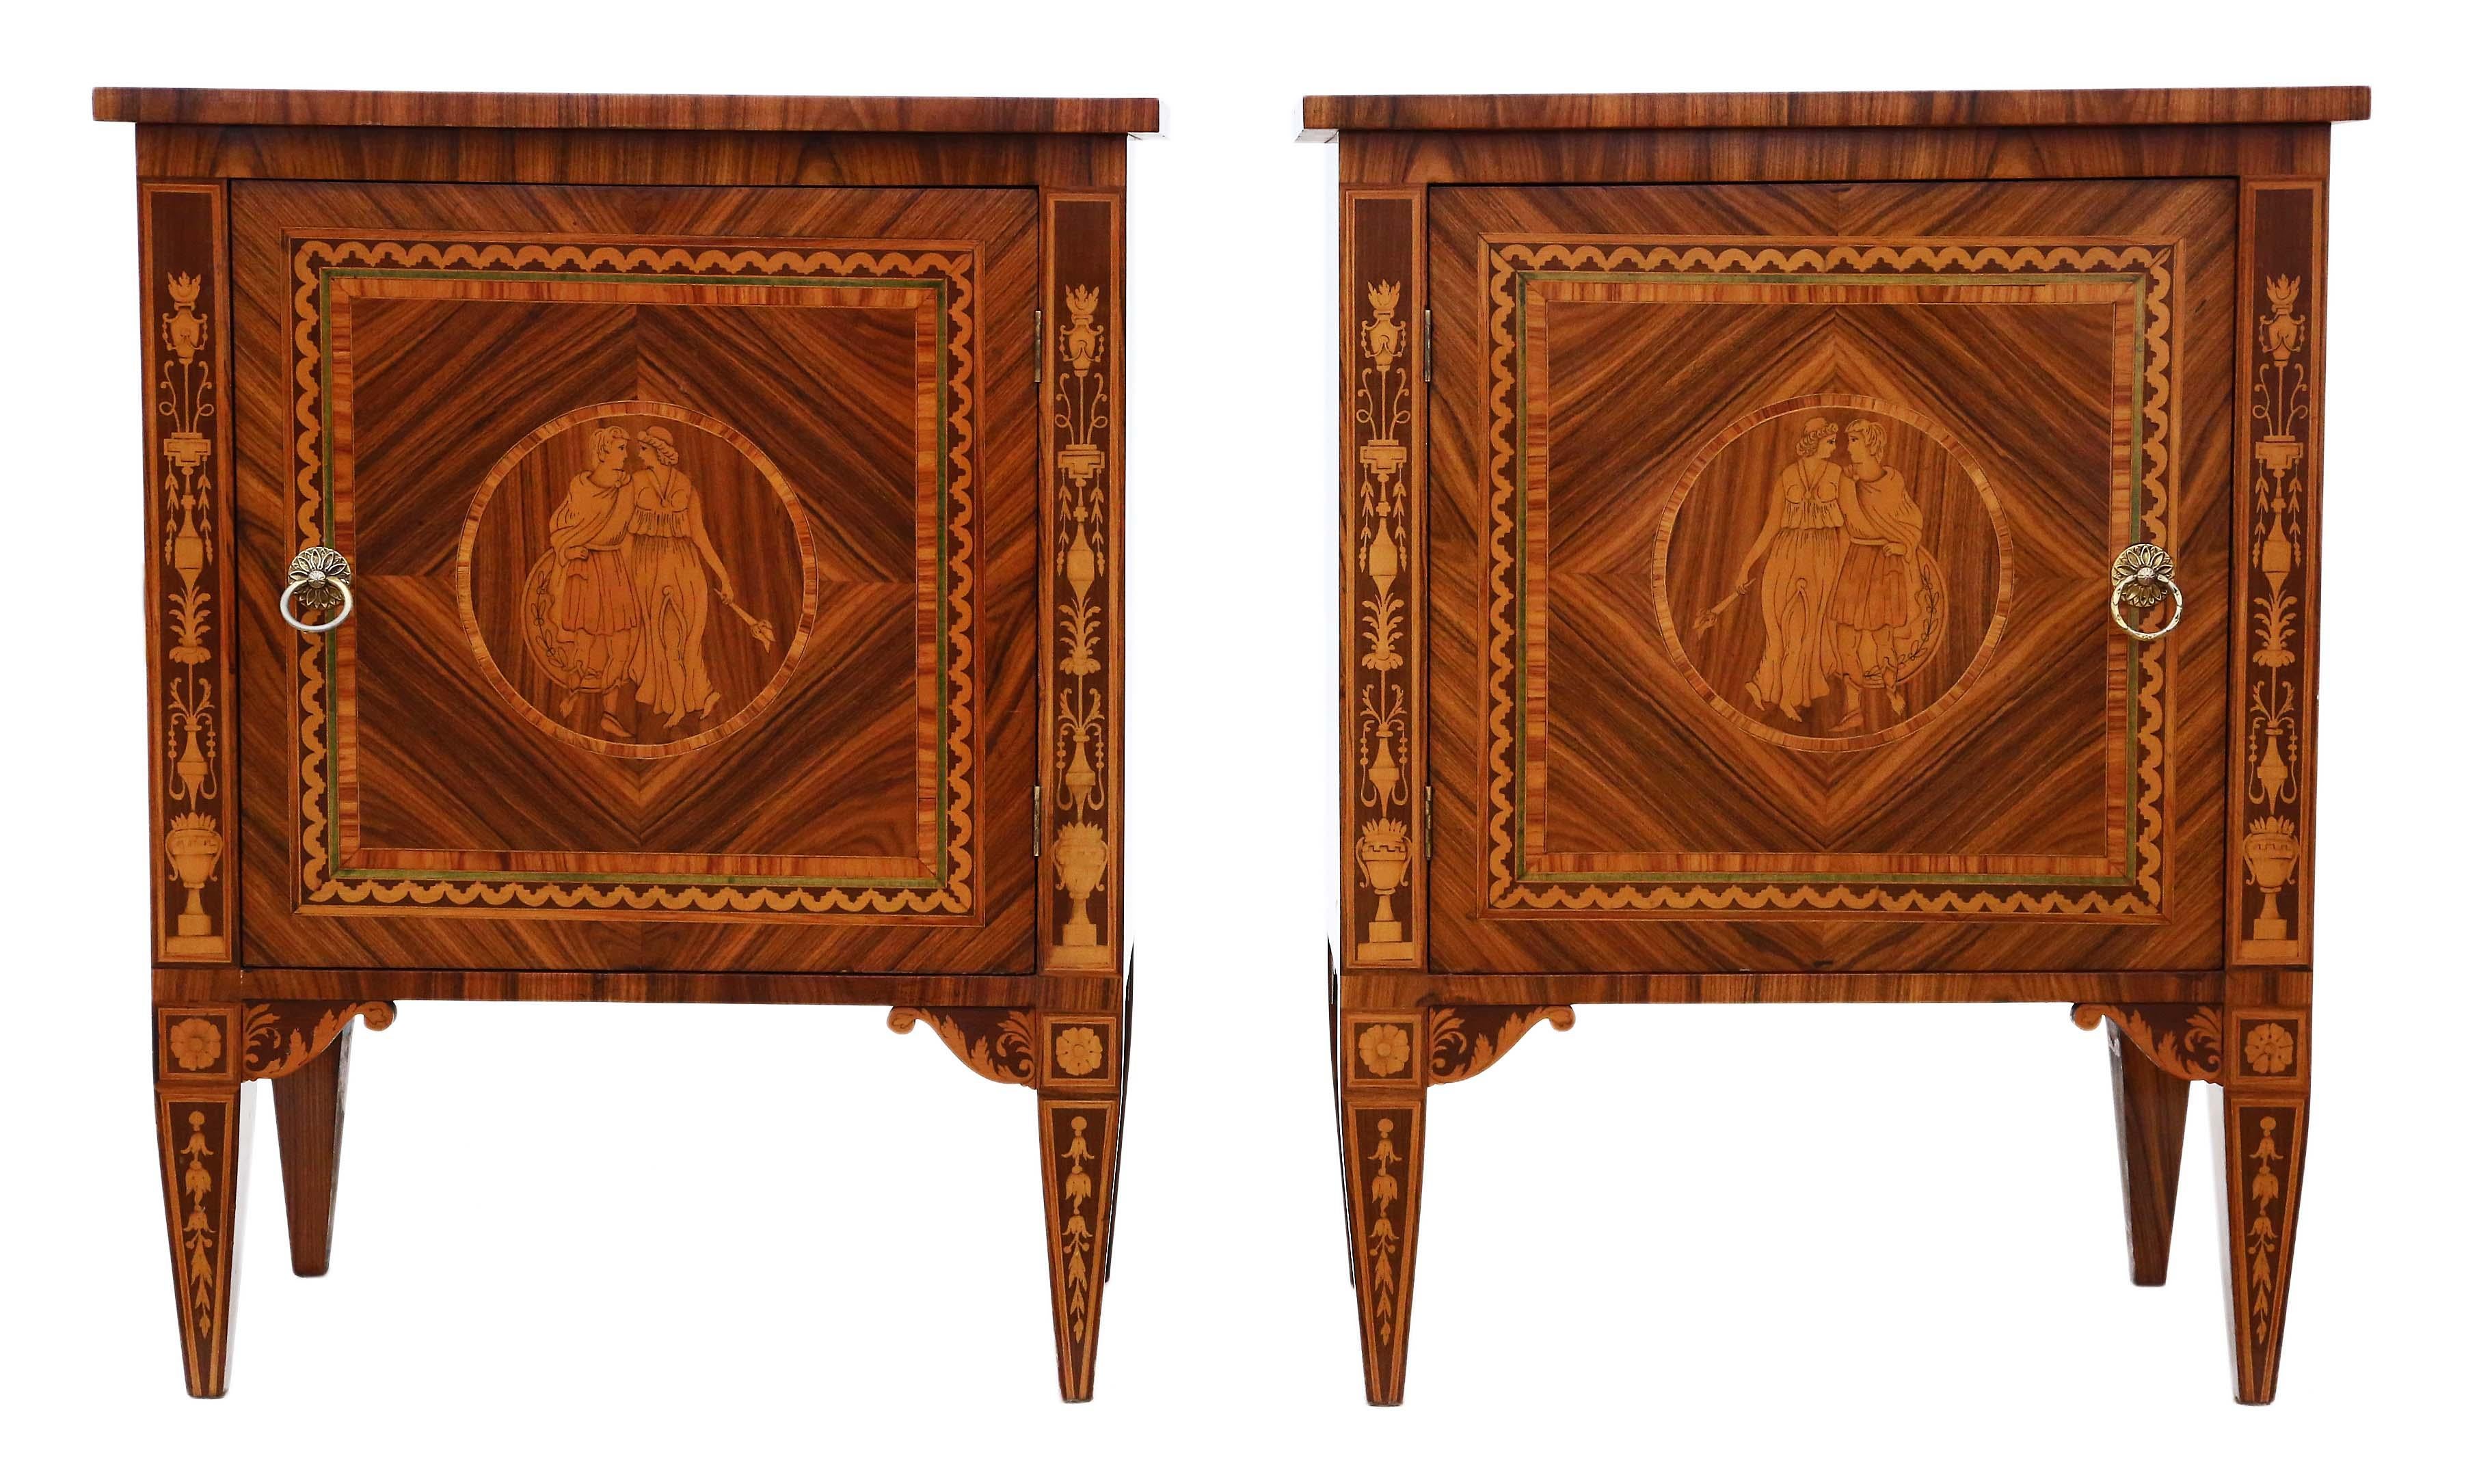 Quality pair of marquetry bedside tables cupboards, dating from the mid-20th century.
No loose joints and no woodworm. Working catches on doors.
Lovely detailed marquetry with exotic woods. Breathtaking decorative pieces... a very rare